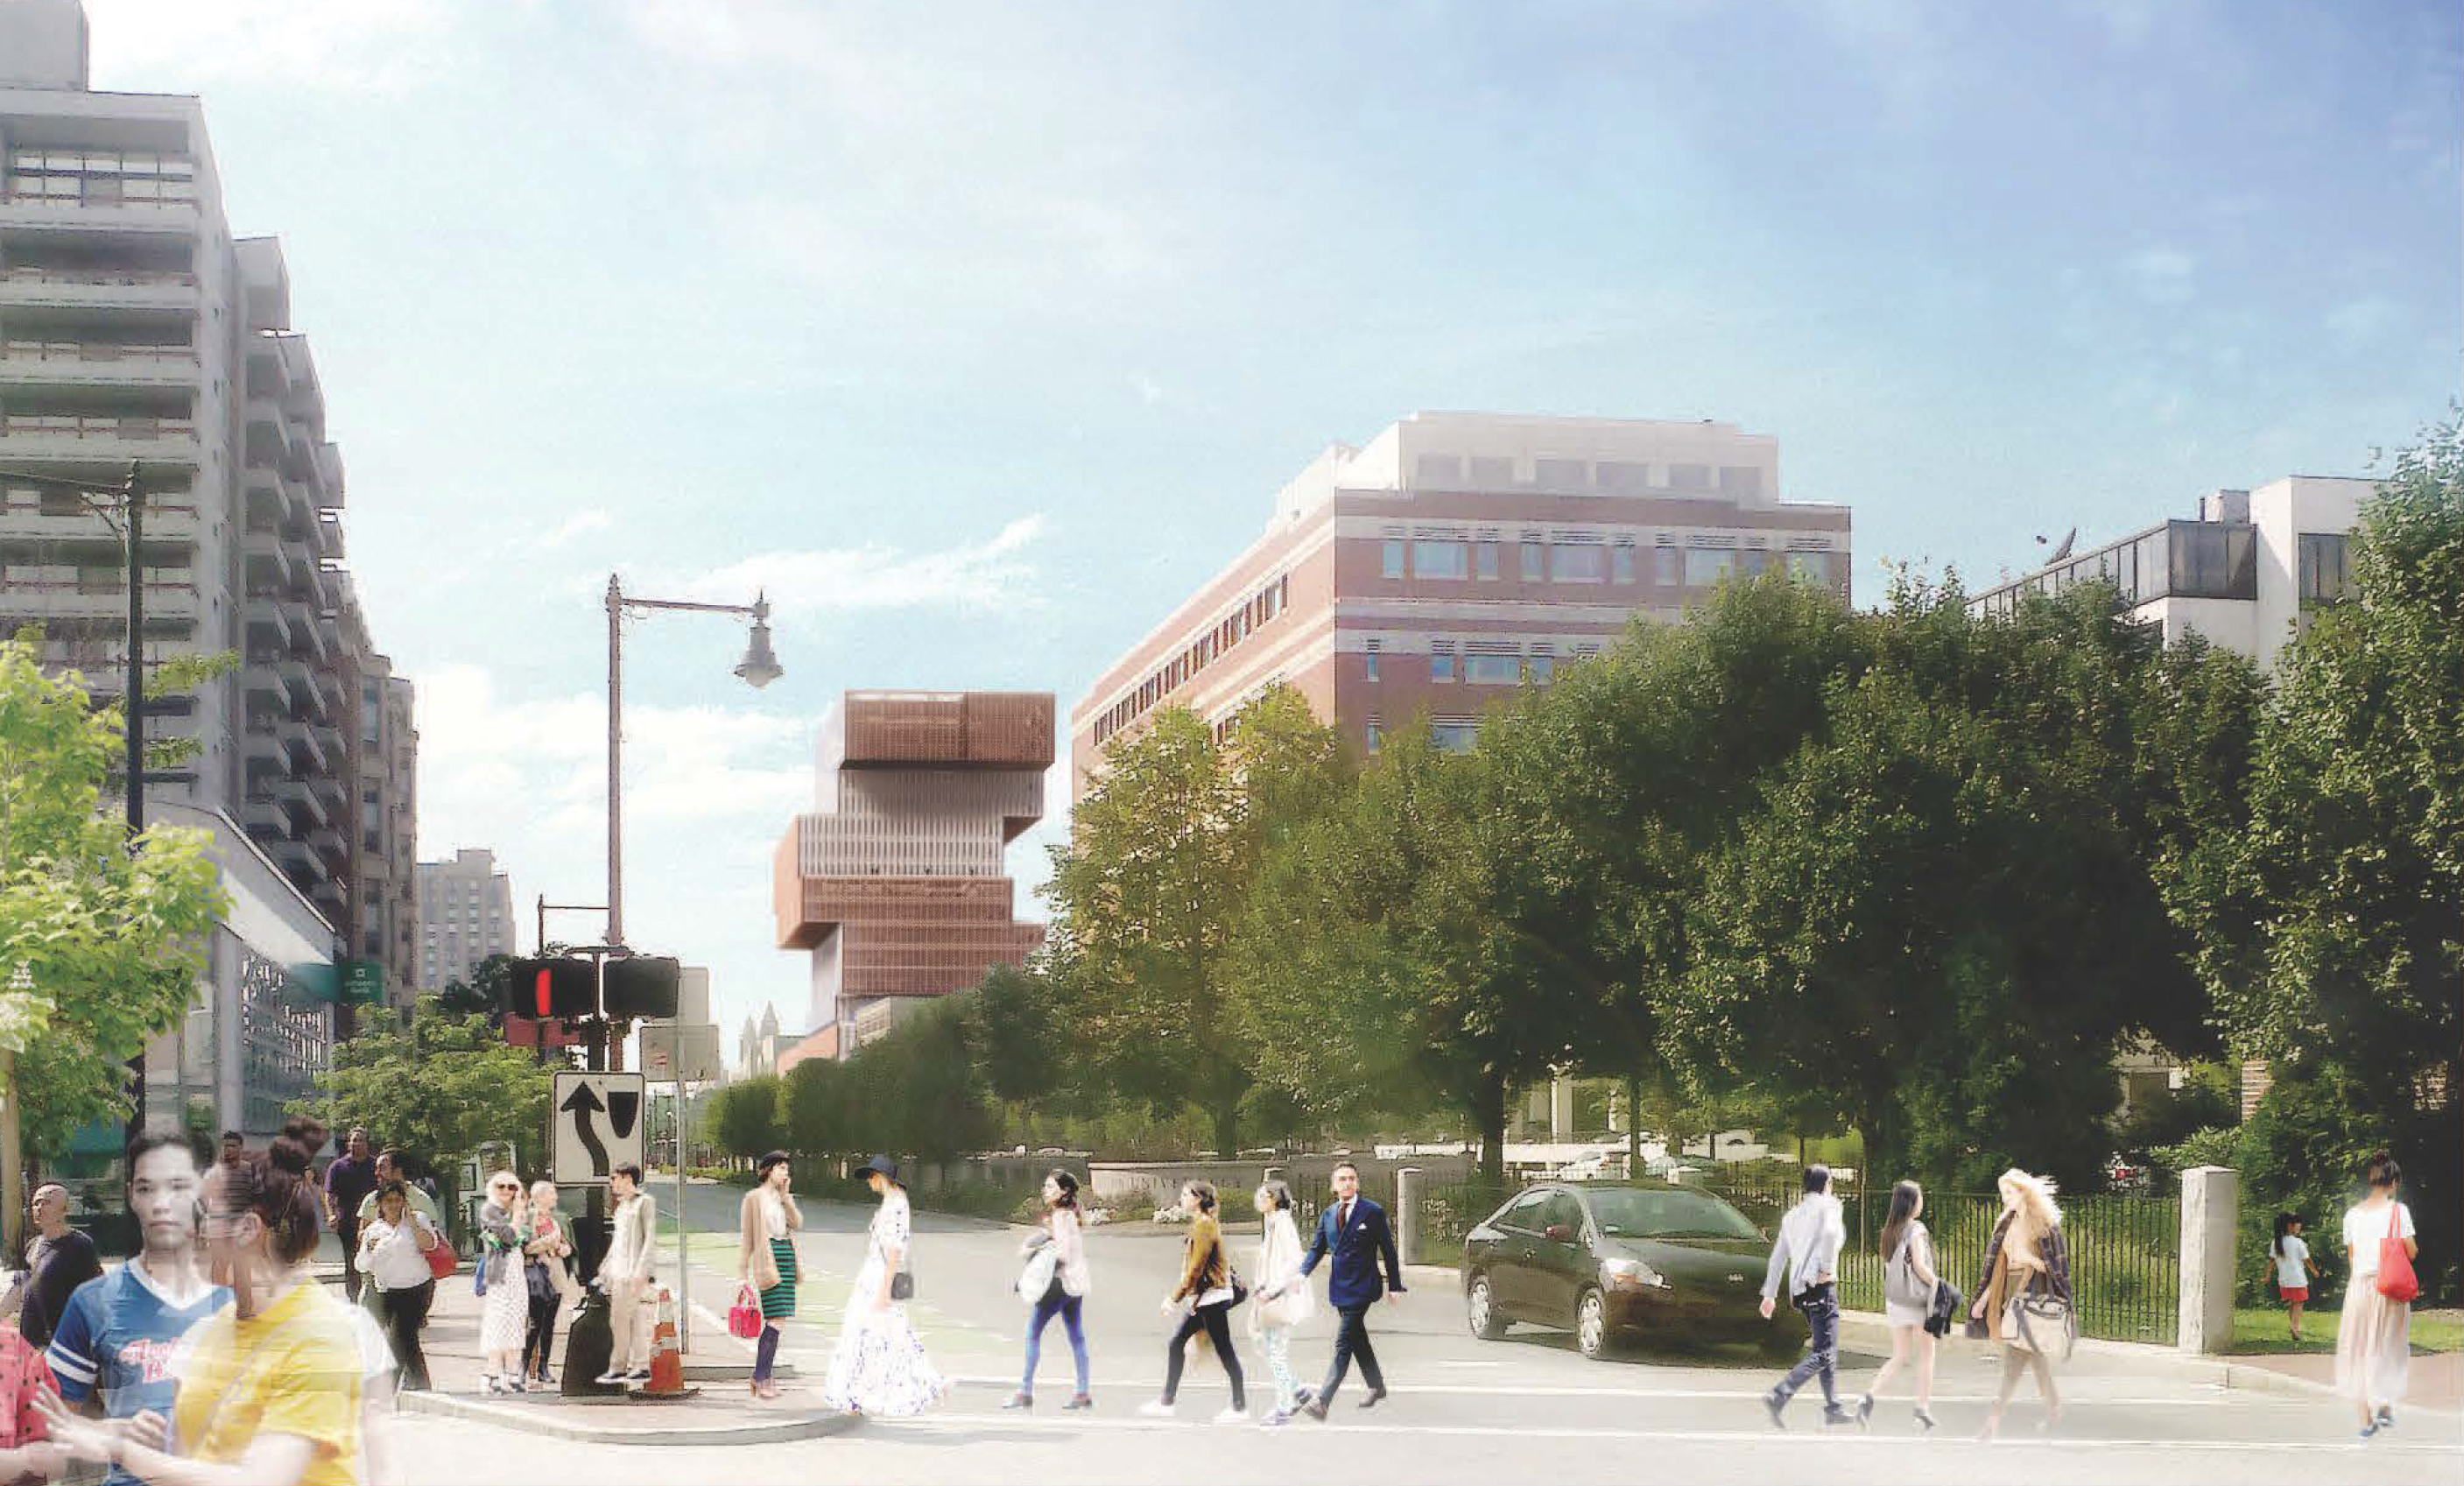 Architectural rendering showing a view of the Boston University Data Sciences Center from Kenmore Square.